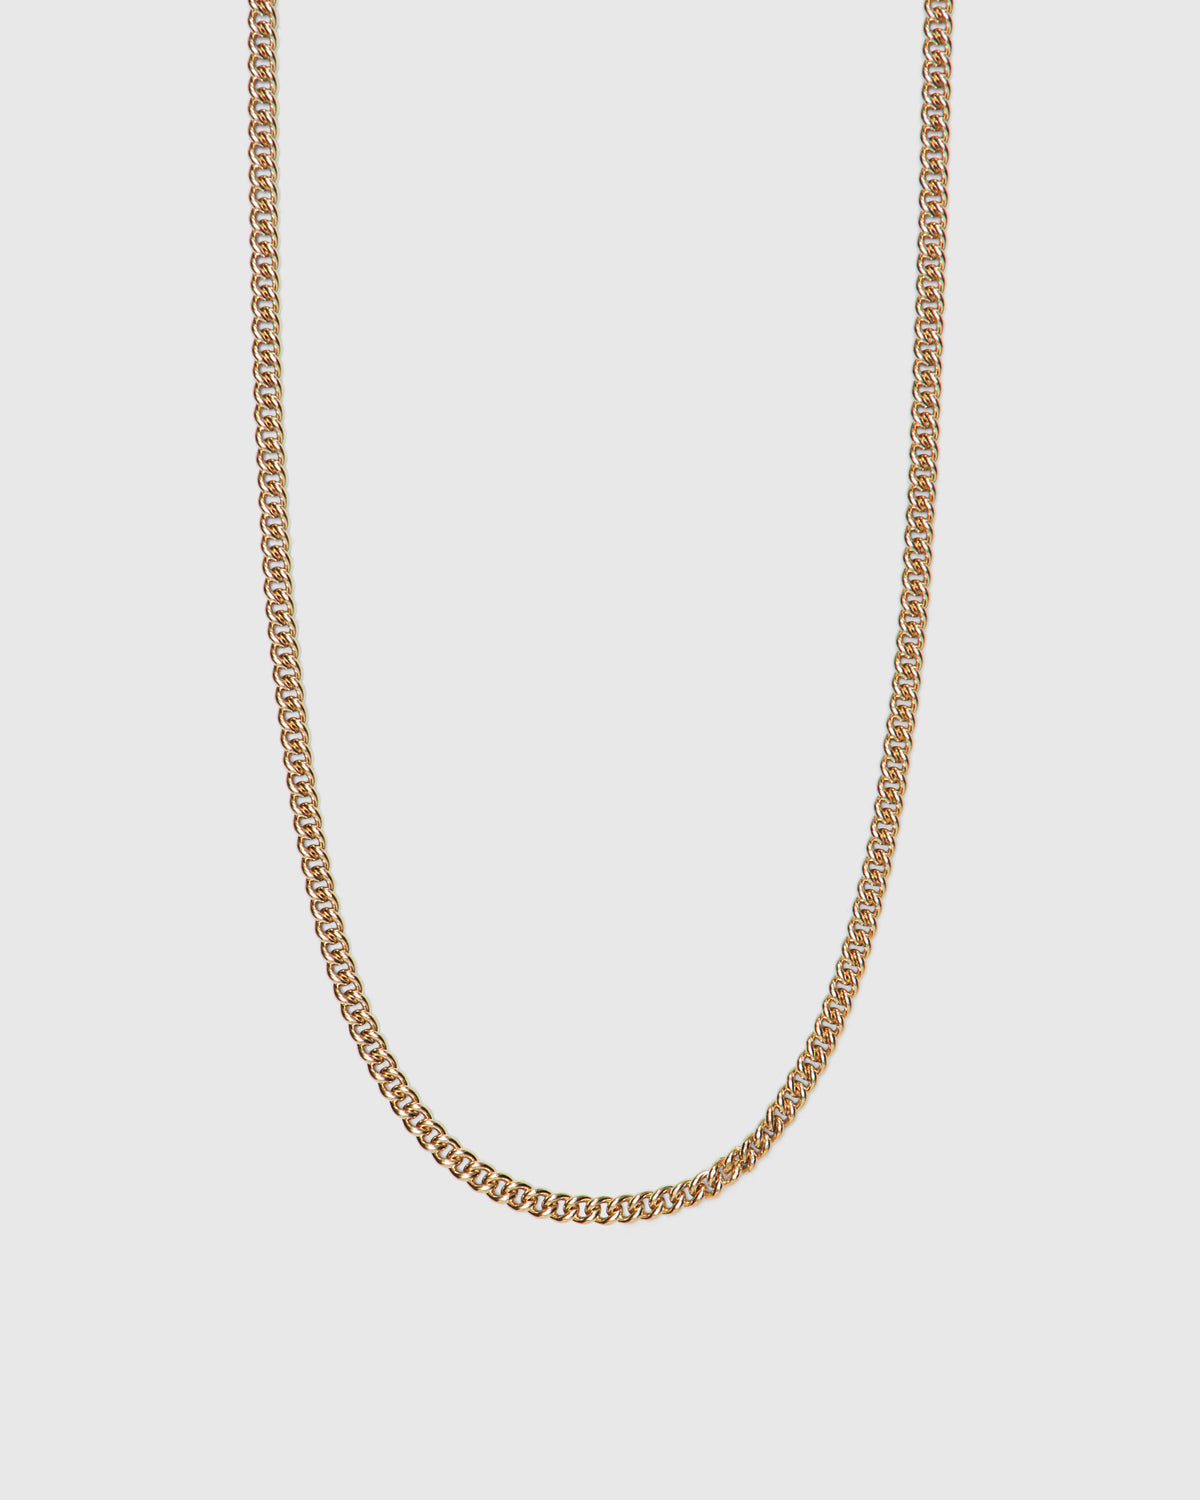 4MM Curb Chain in 14K Gold Filled